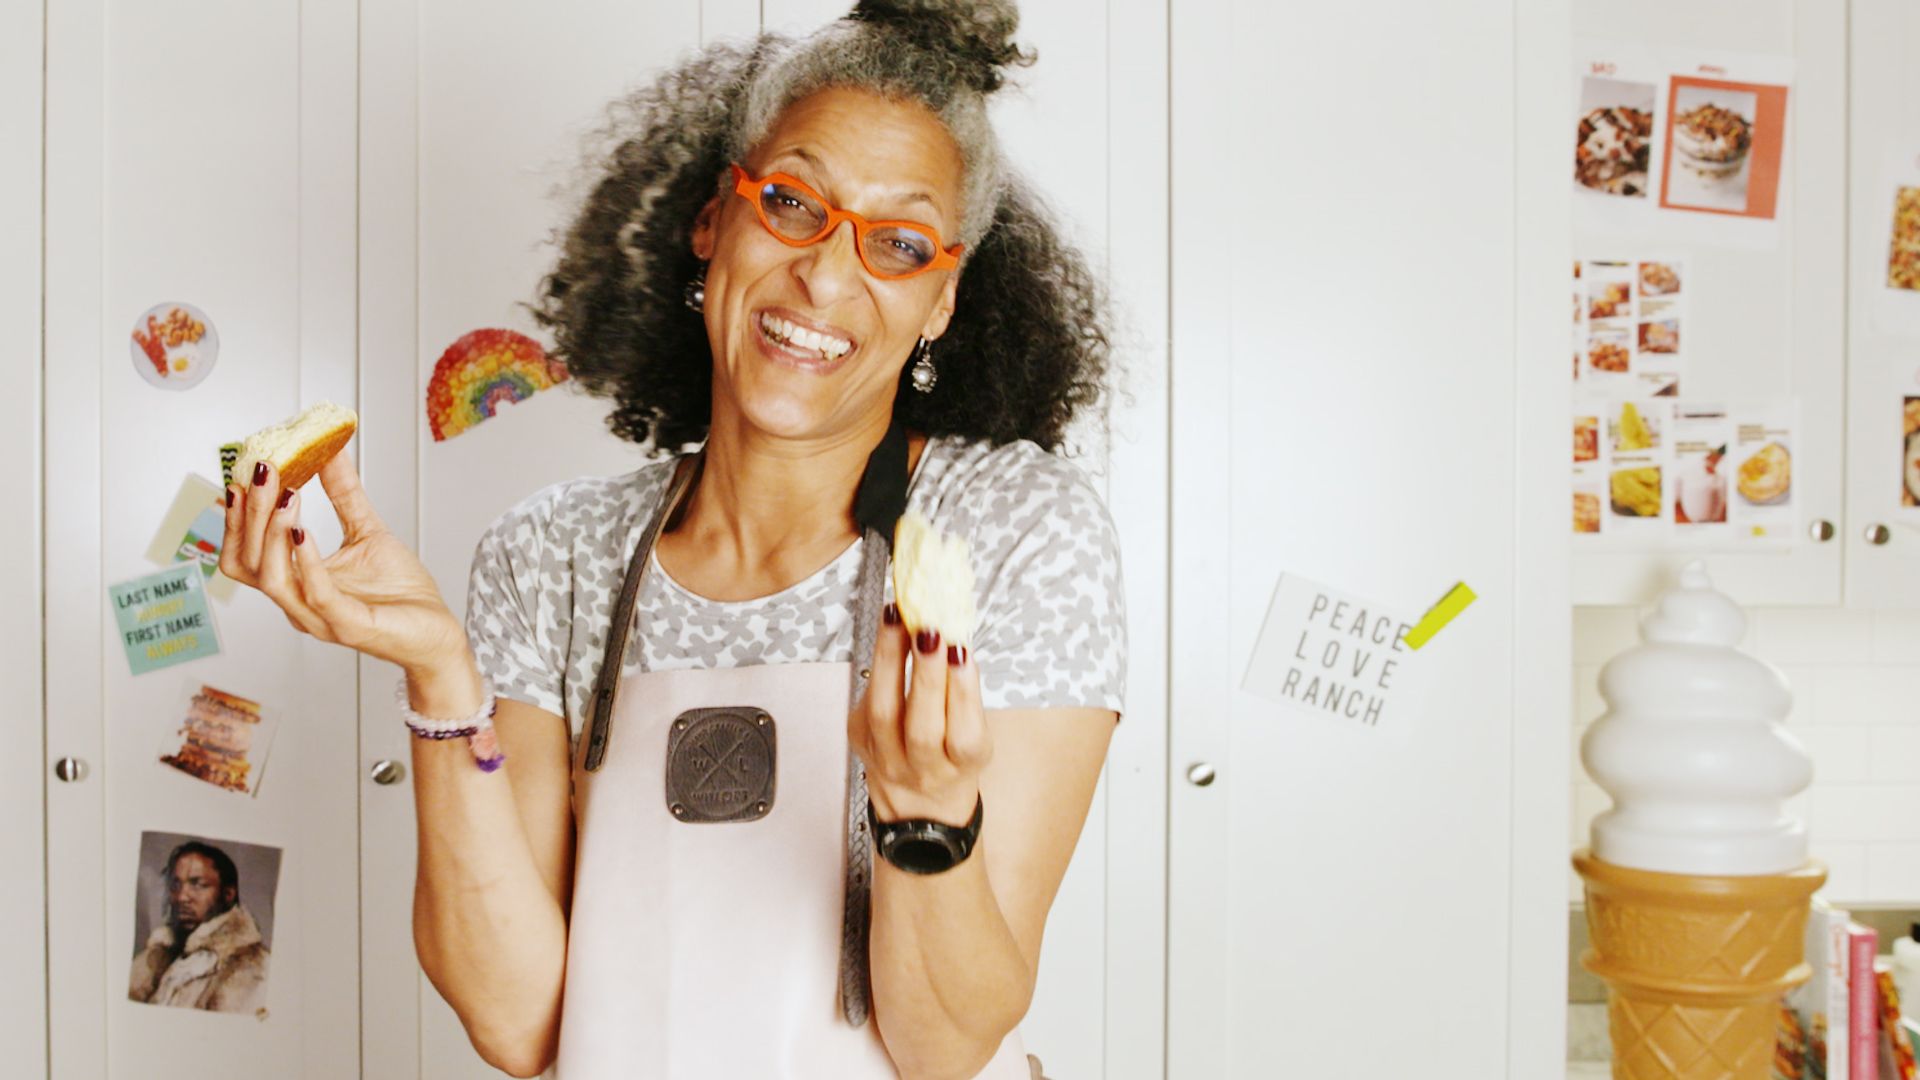 Carla Hall S Biscuit Recipe How To Make Flaky Buttermilk Biscuits Images, Photos, Reviews